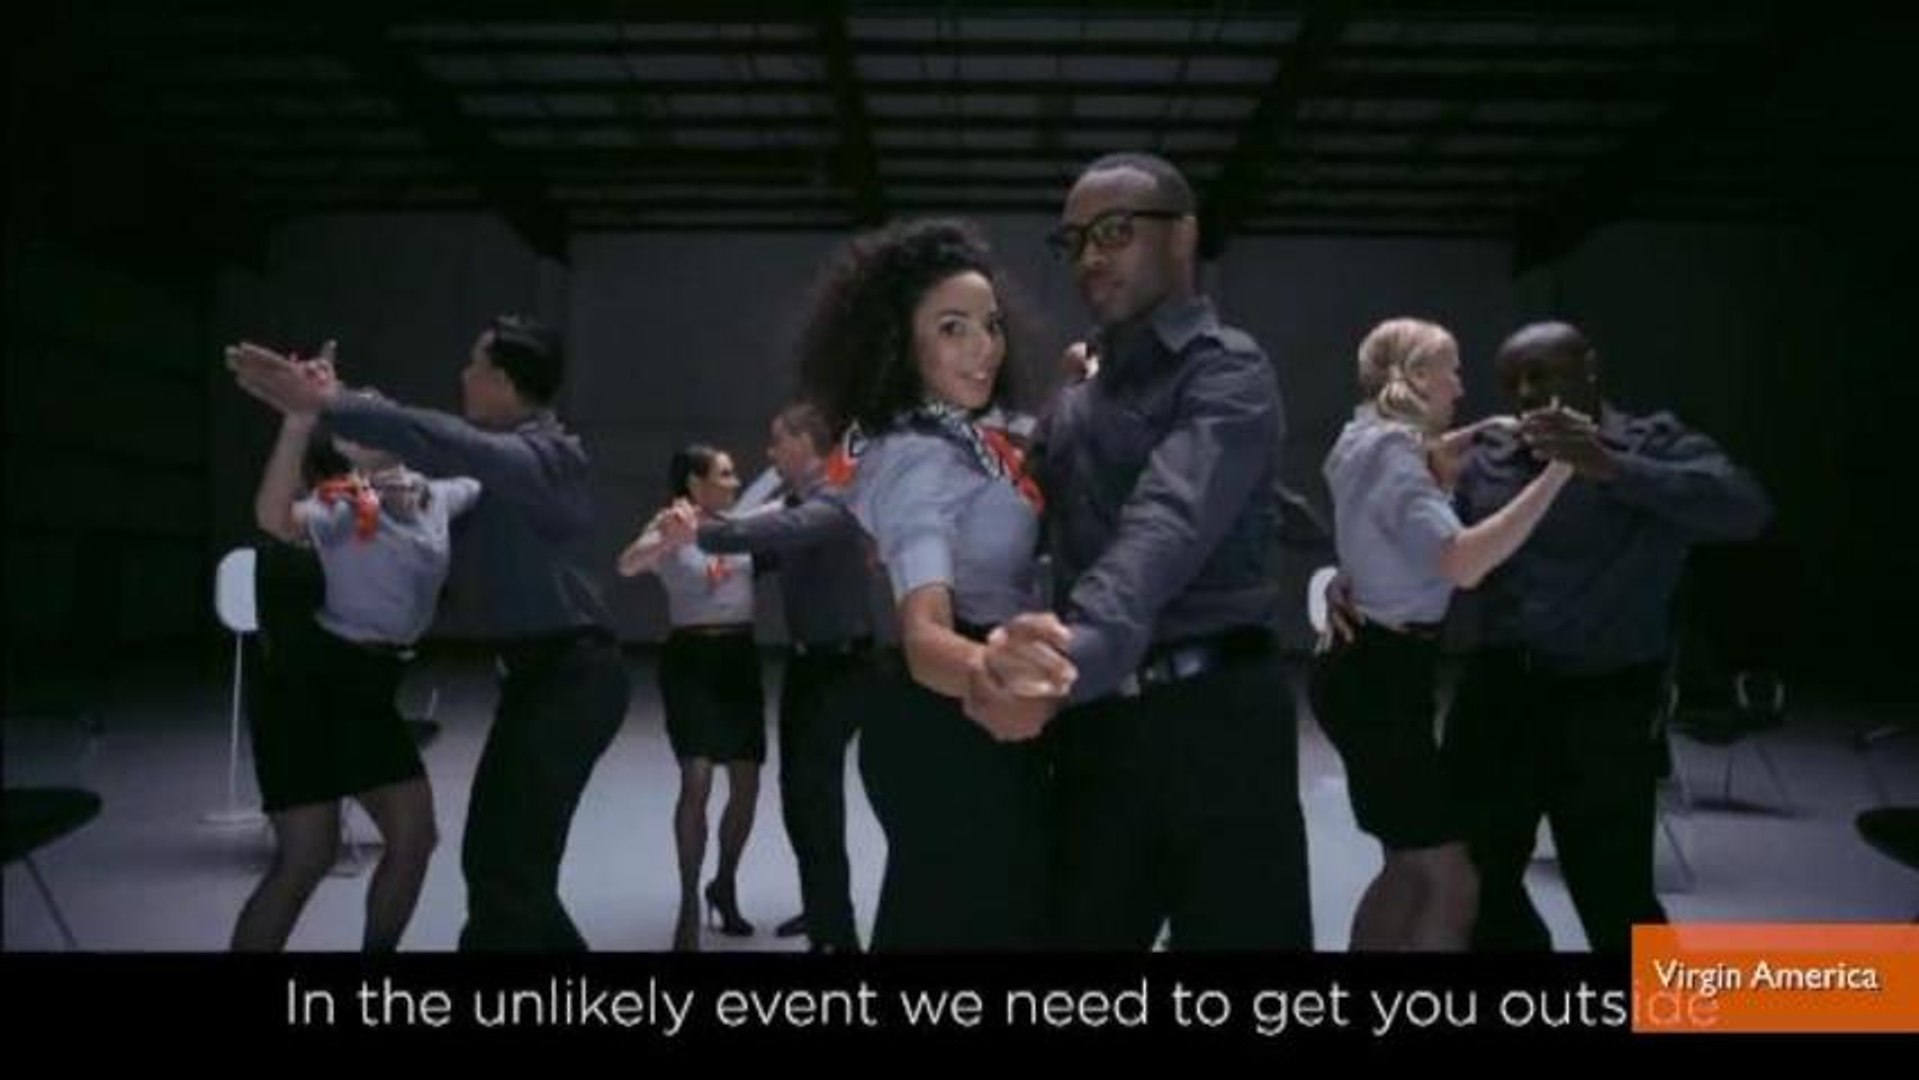 Virgin America Uses Singers and Dancers in Safety Video